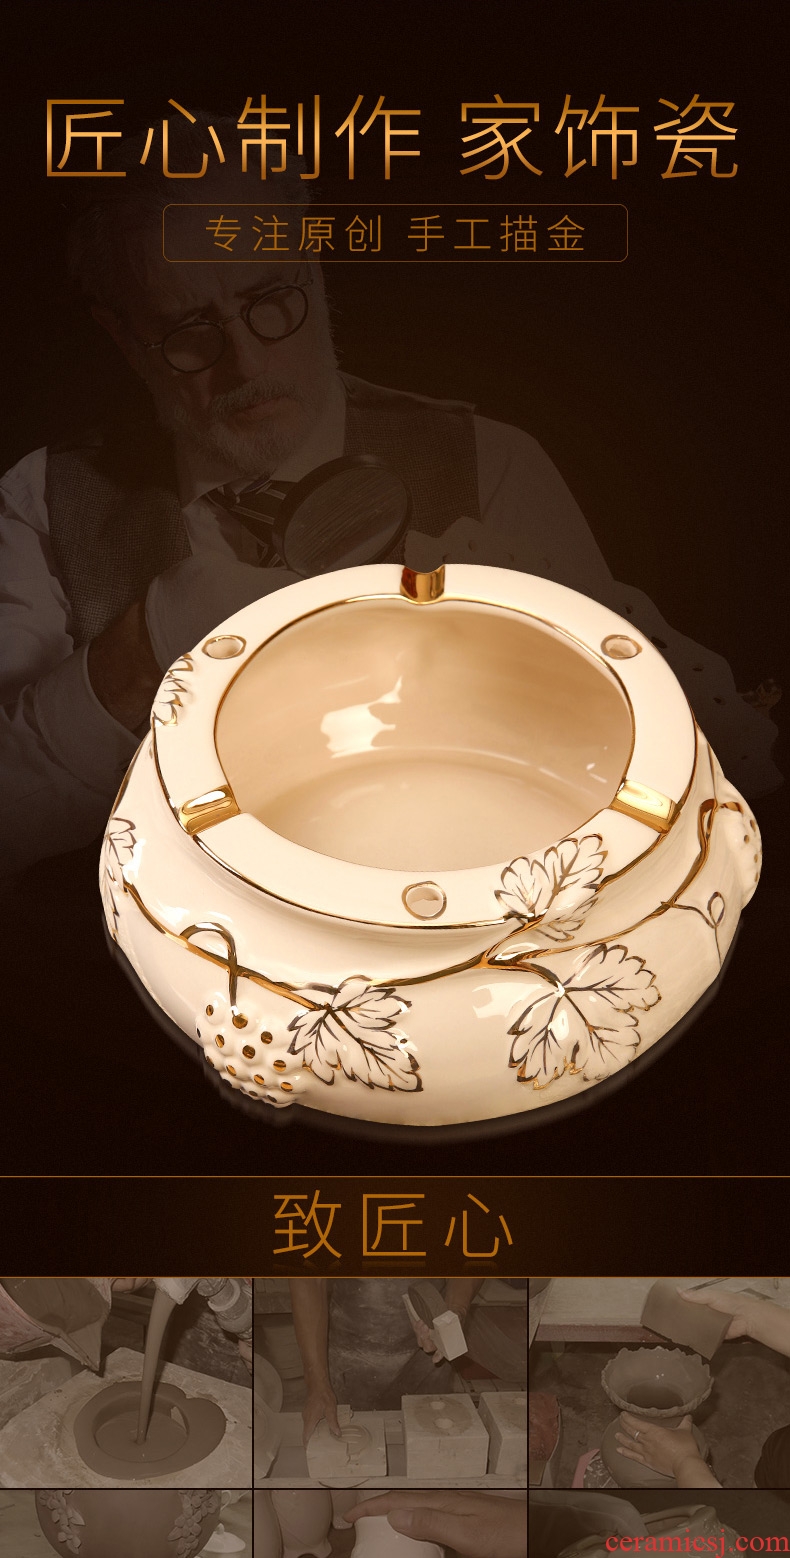 The Vatican Sally's European ceramic ashtray individuality creative and practical home sitting room tea table decoration luxury furnishing articles